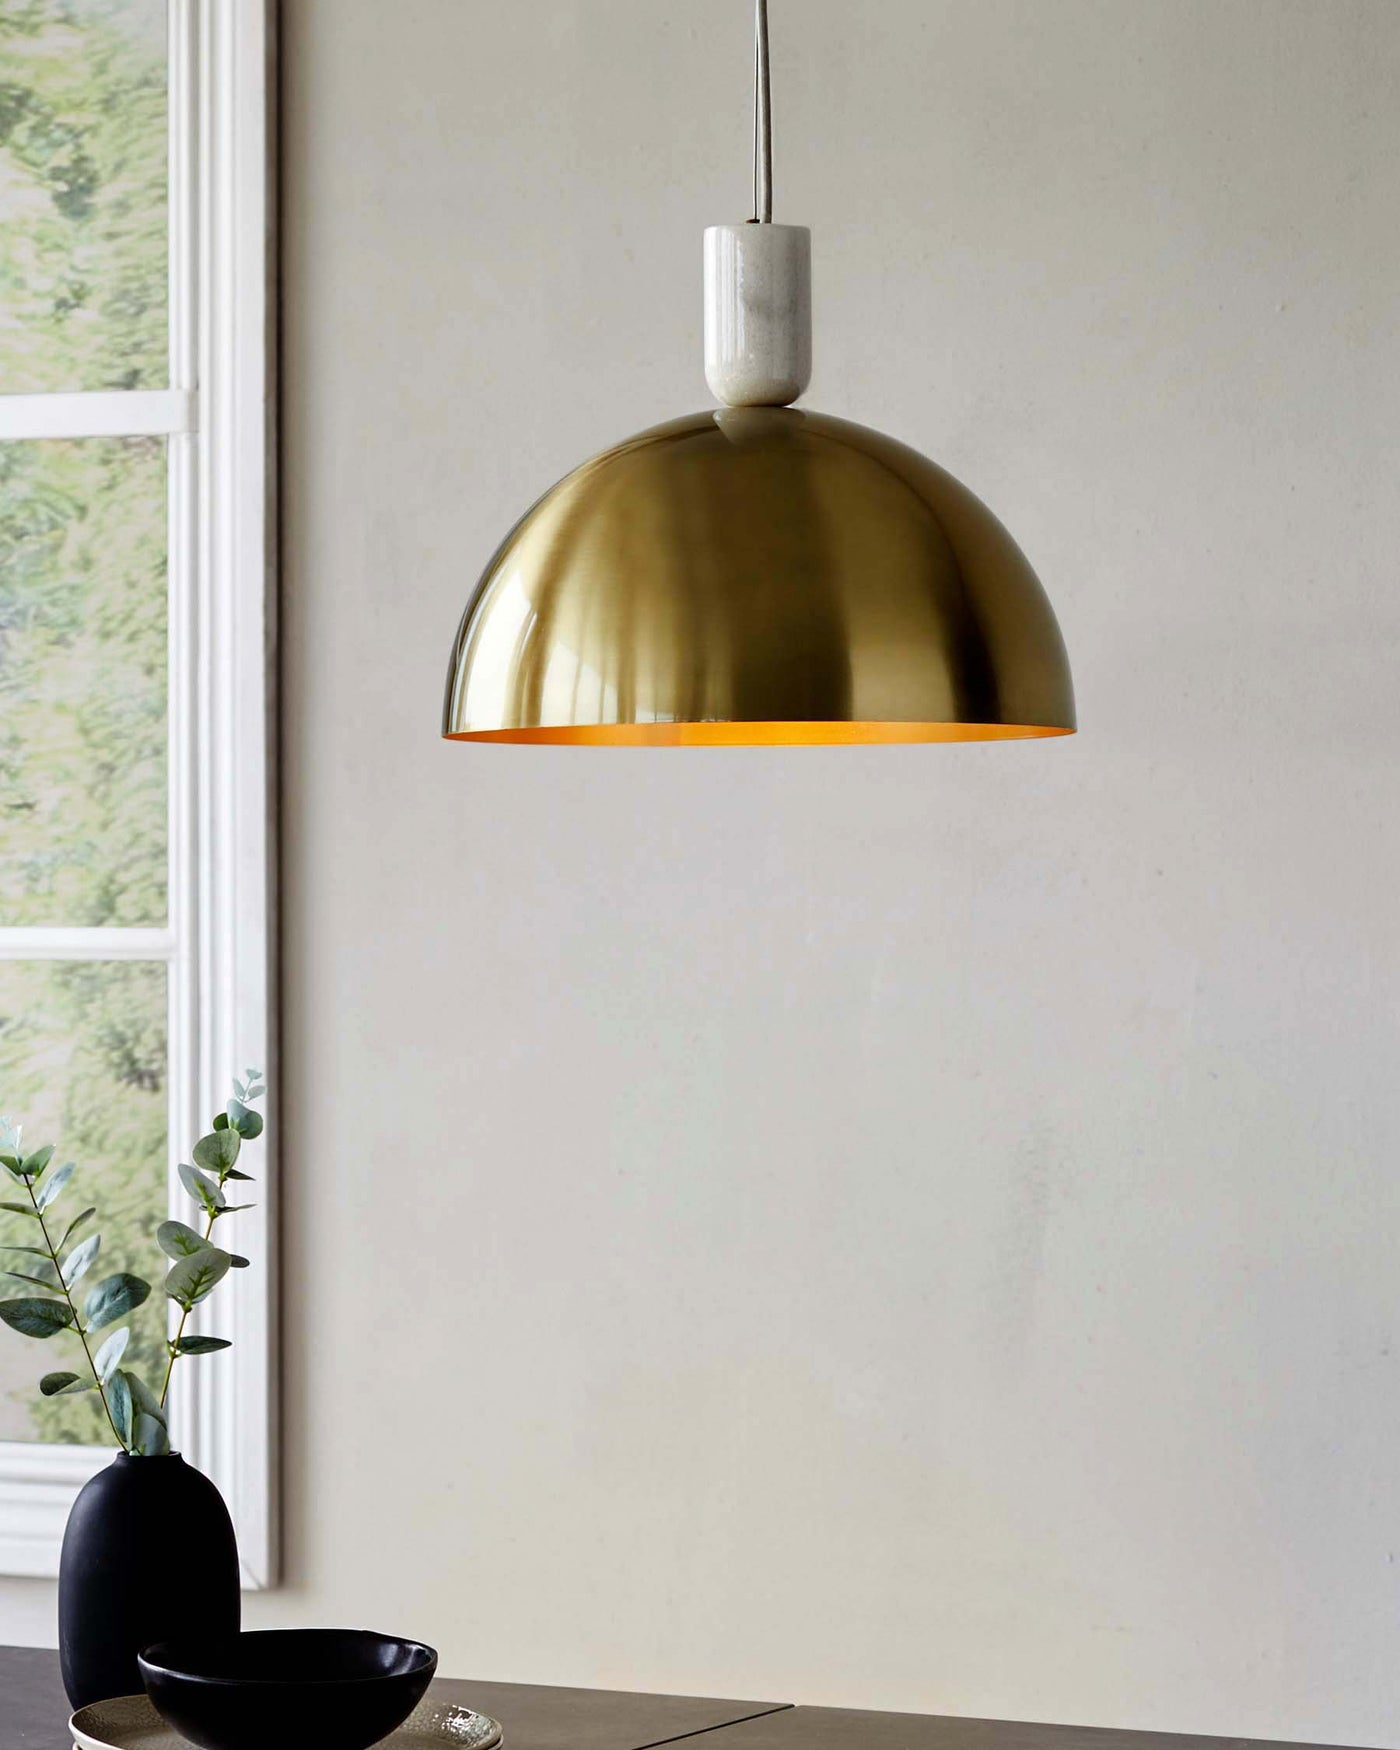 Elegant gold dome pendant light with a matte white top cap, hanging over a sleek dark tabletop adorned with a minimalist black vase containing eucalyptus branches.